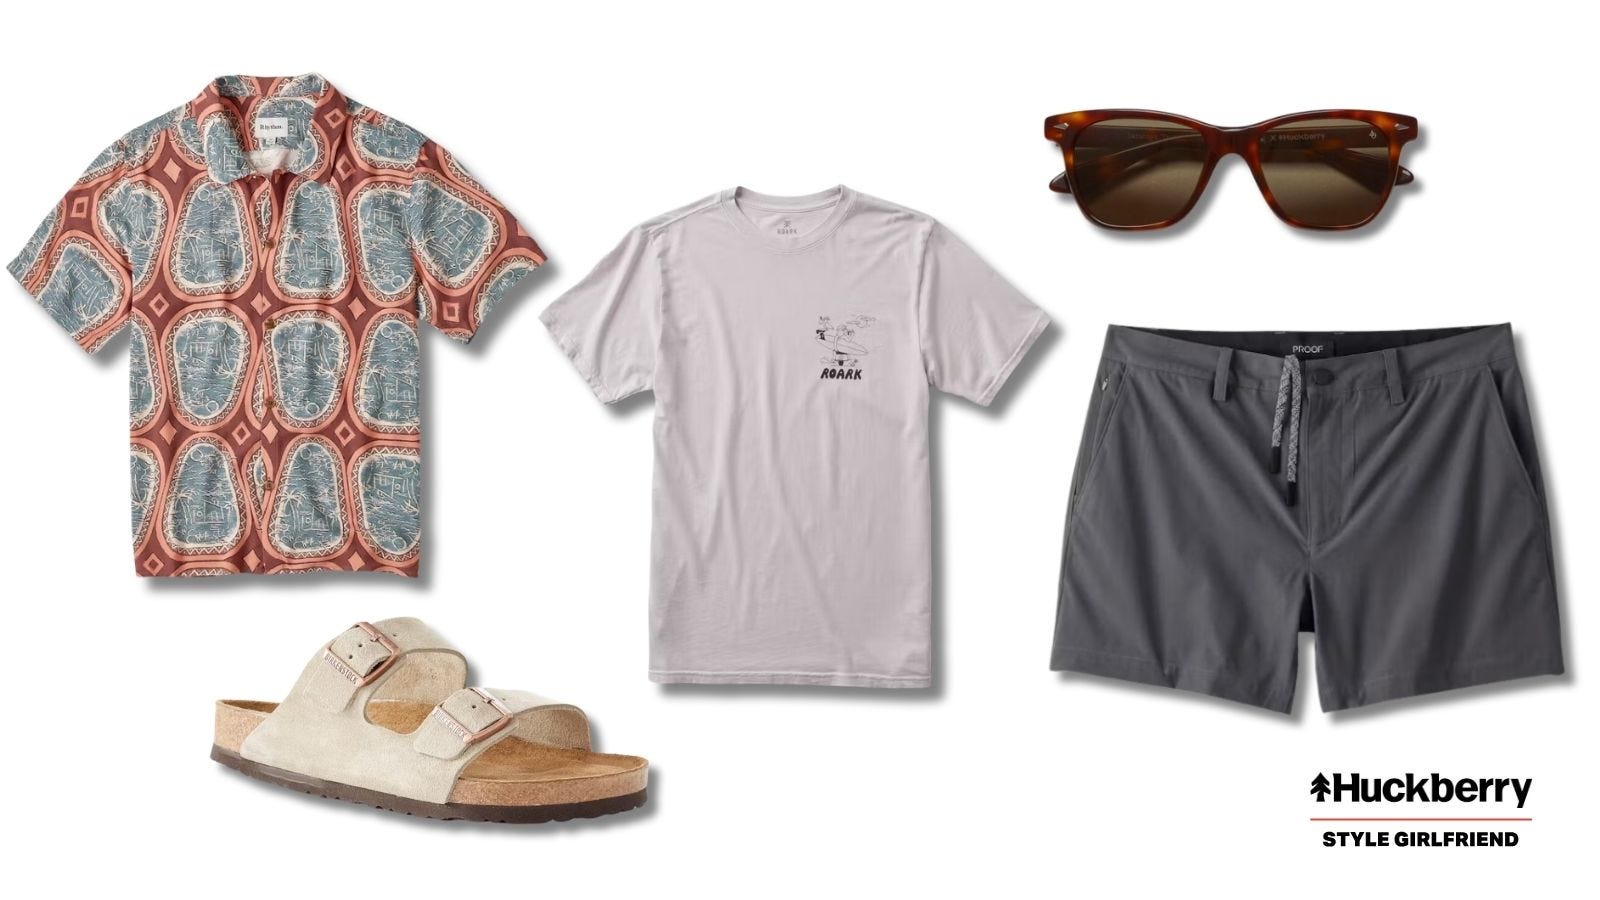 collage image of a men's warm weather casual outfit featuring a patterned short-sleeve button down shirt, t-shirt, grey shorts, sandals and sunglasses